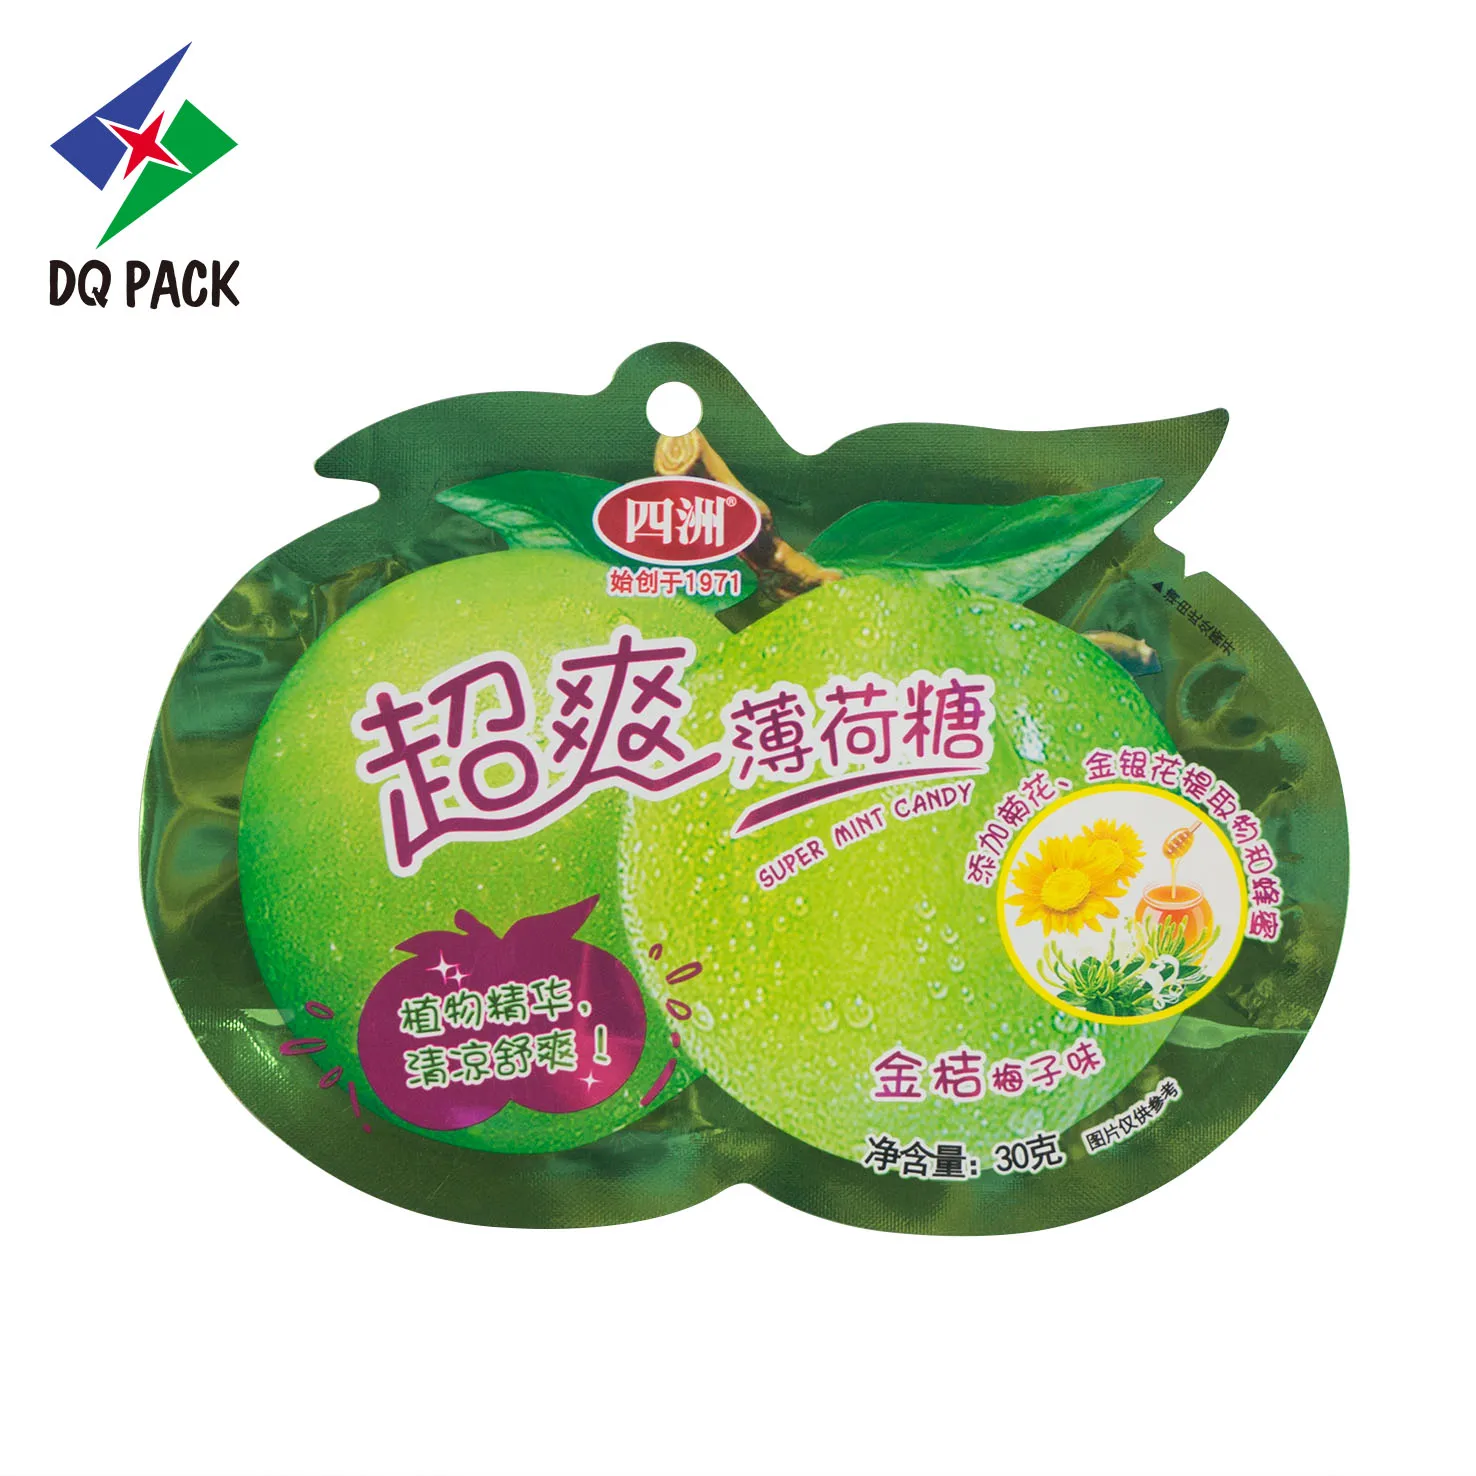 Custom design special shape bag for candy Packaging from DQ PACK